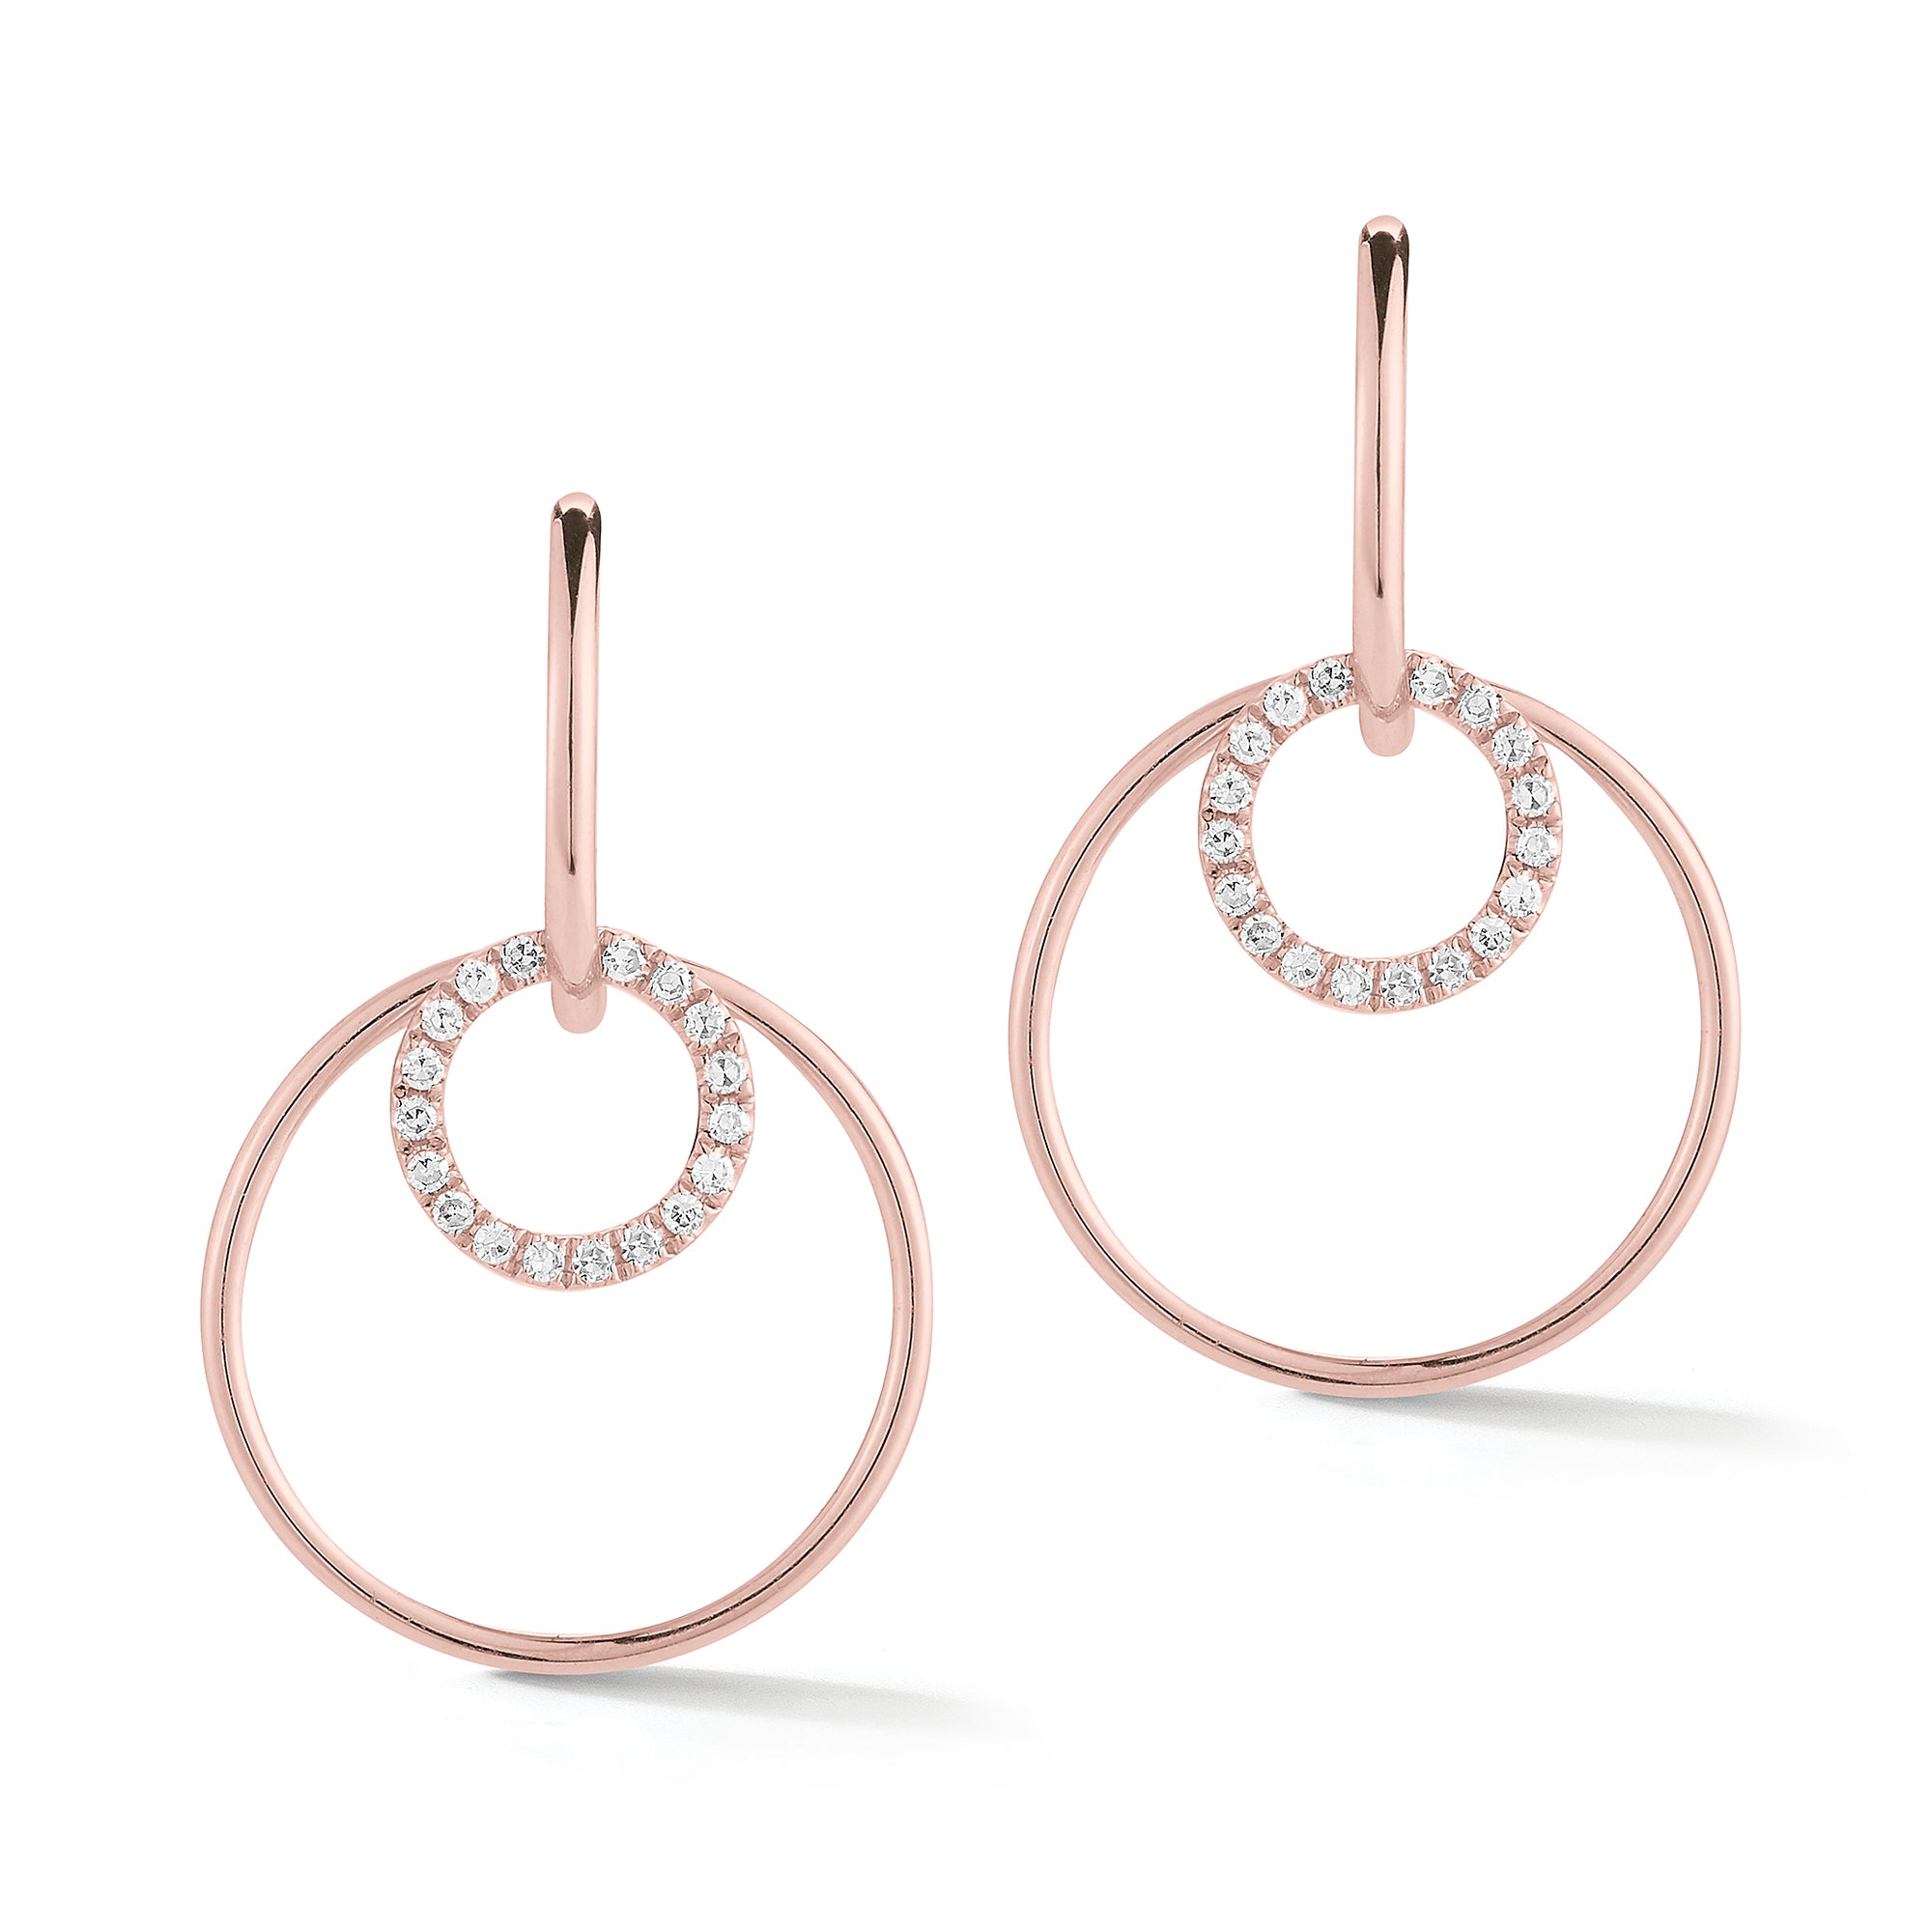 Diamond Double Hoop Drop Earrings -14K gold weighing 2.48 grams  -38 round shared prong-set diamonds totaling 0.12 carats